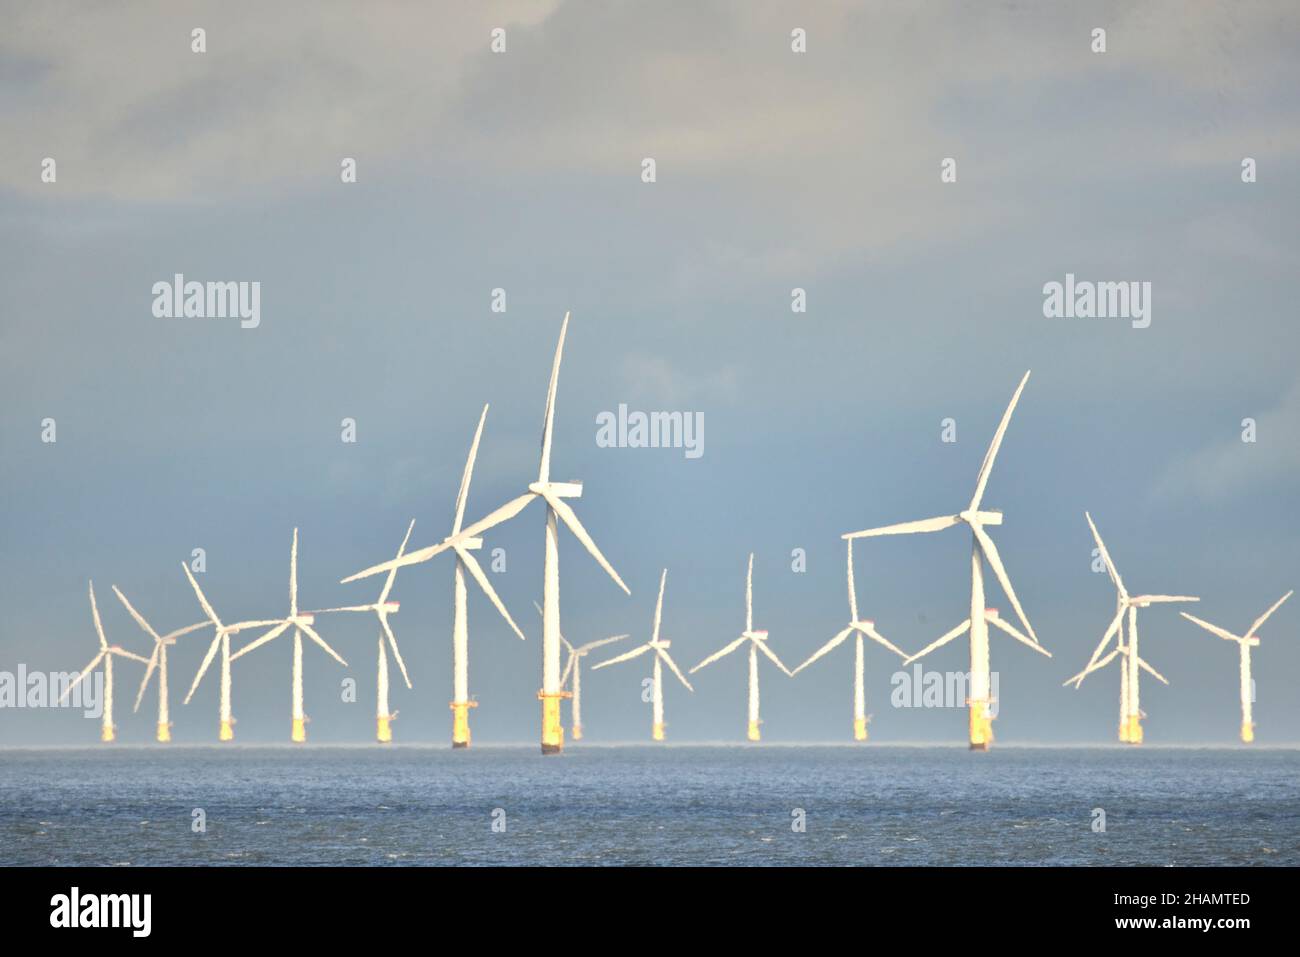 Gwynt y Môr (sea wind)  576-megawatt (MW) offshore wind farm located off the coast of Wales and is the fifth largest operating offshore wind farm Stock Photo